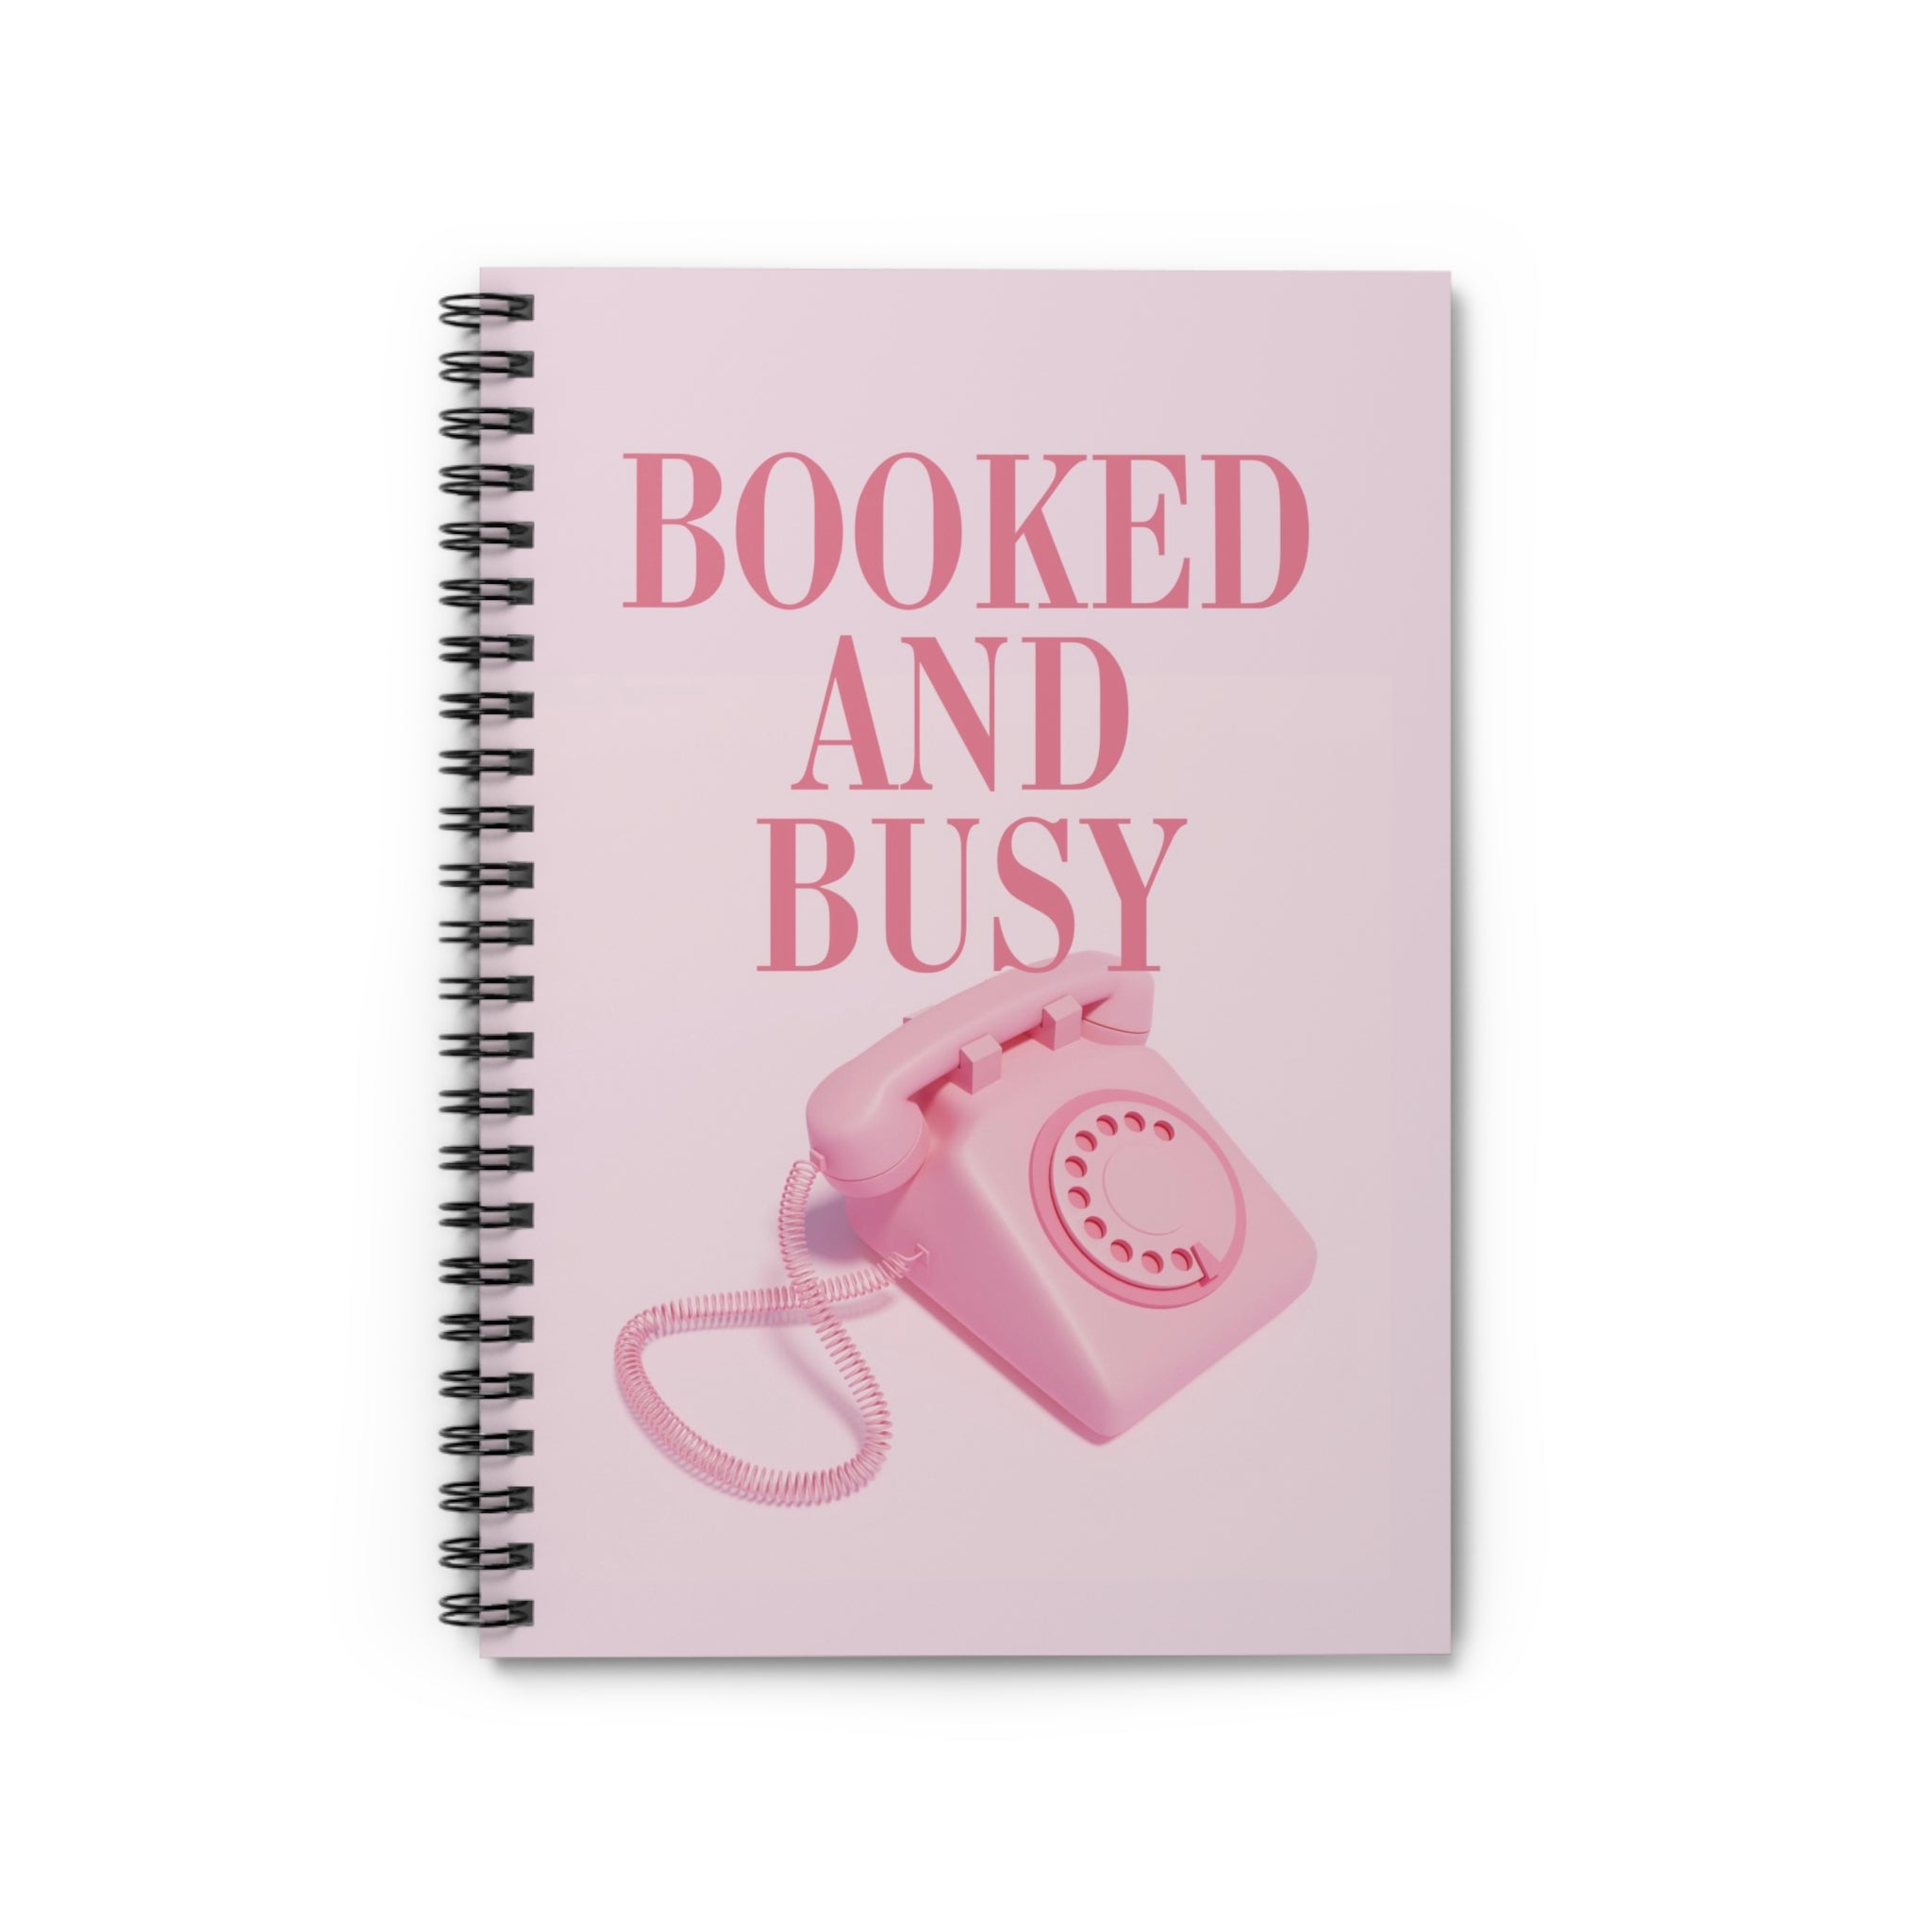 Booked and Busy Spiral Notebook